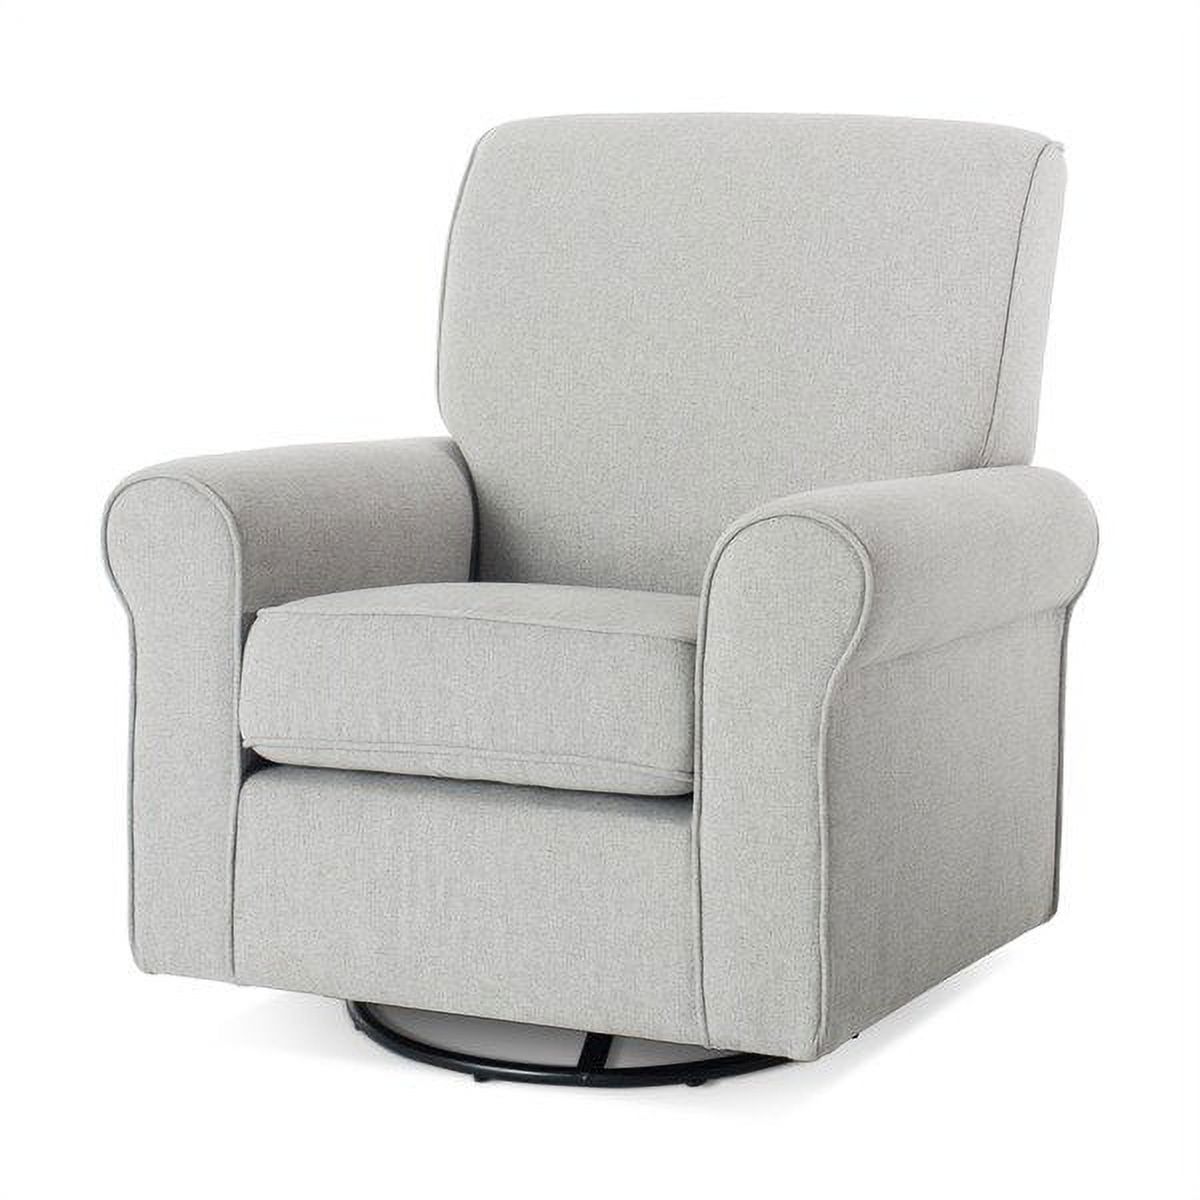 Serene Upholstered Swivel Glider Rocker Chair in Flecked Gray by Forever Eclectic - image 1 of 6